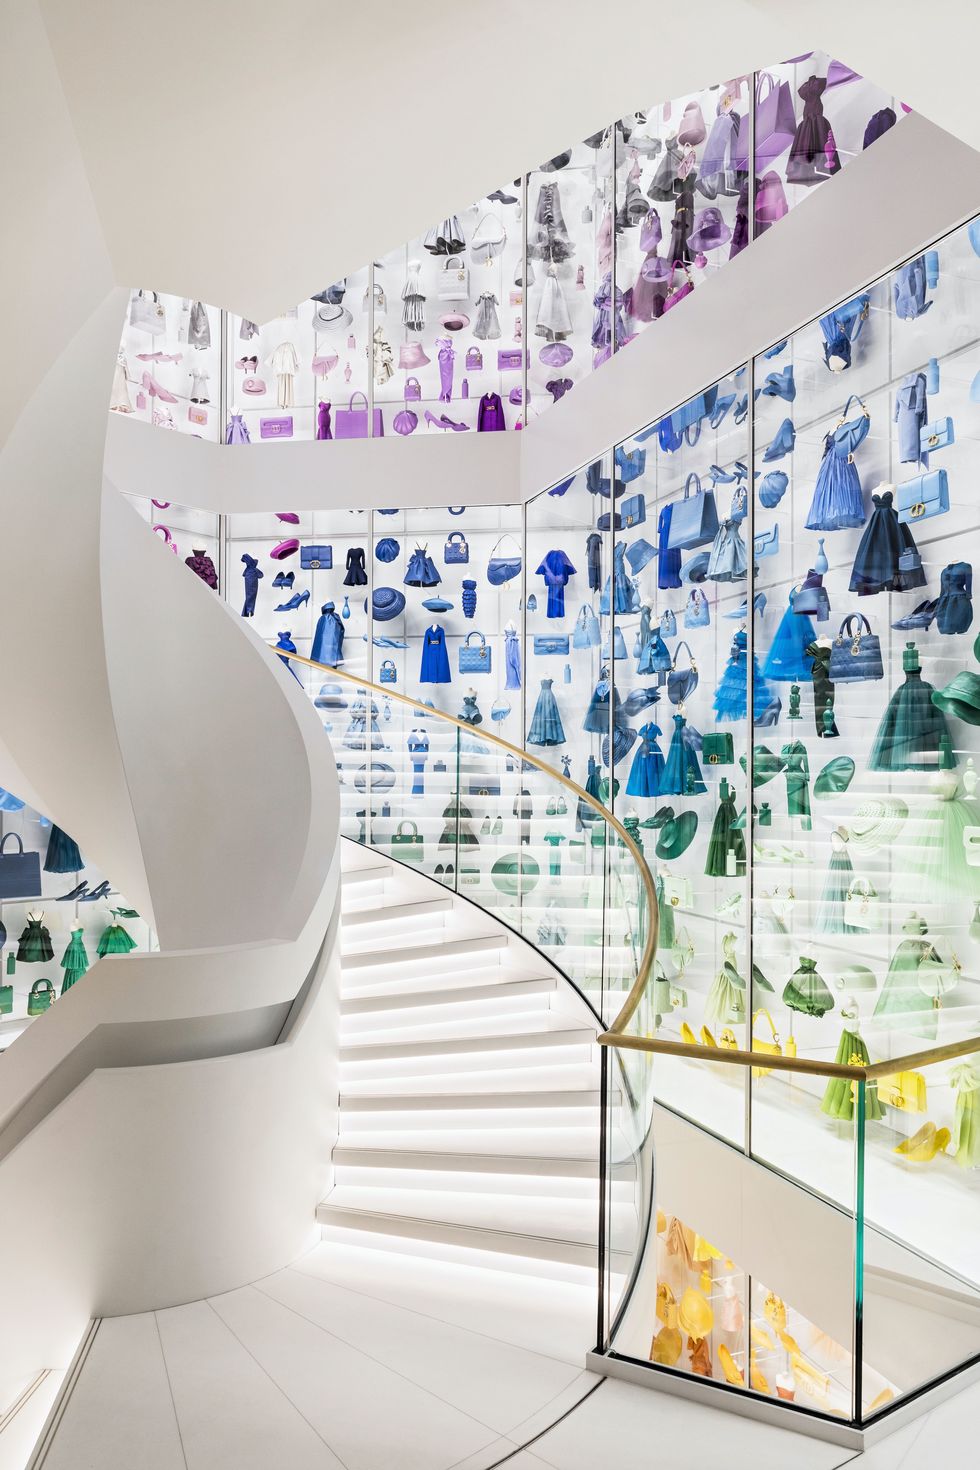 Be Inspired By Peter Marino's Louis Vuitton Store Design In London